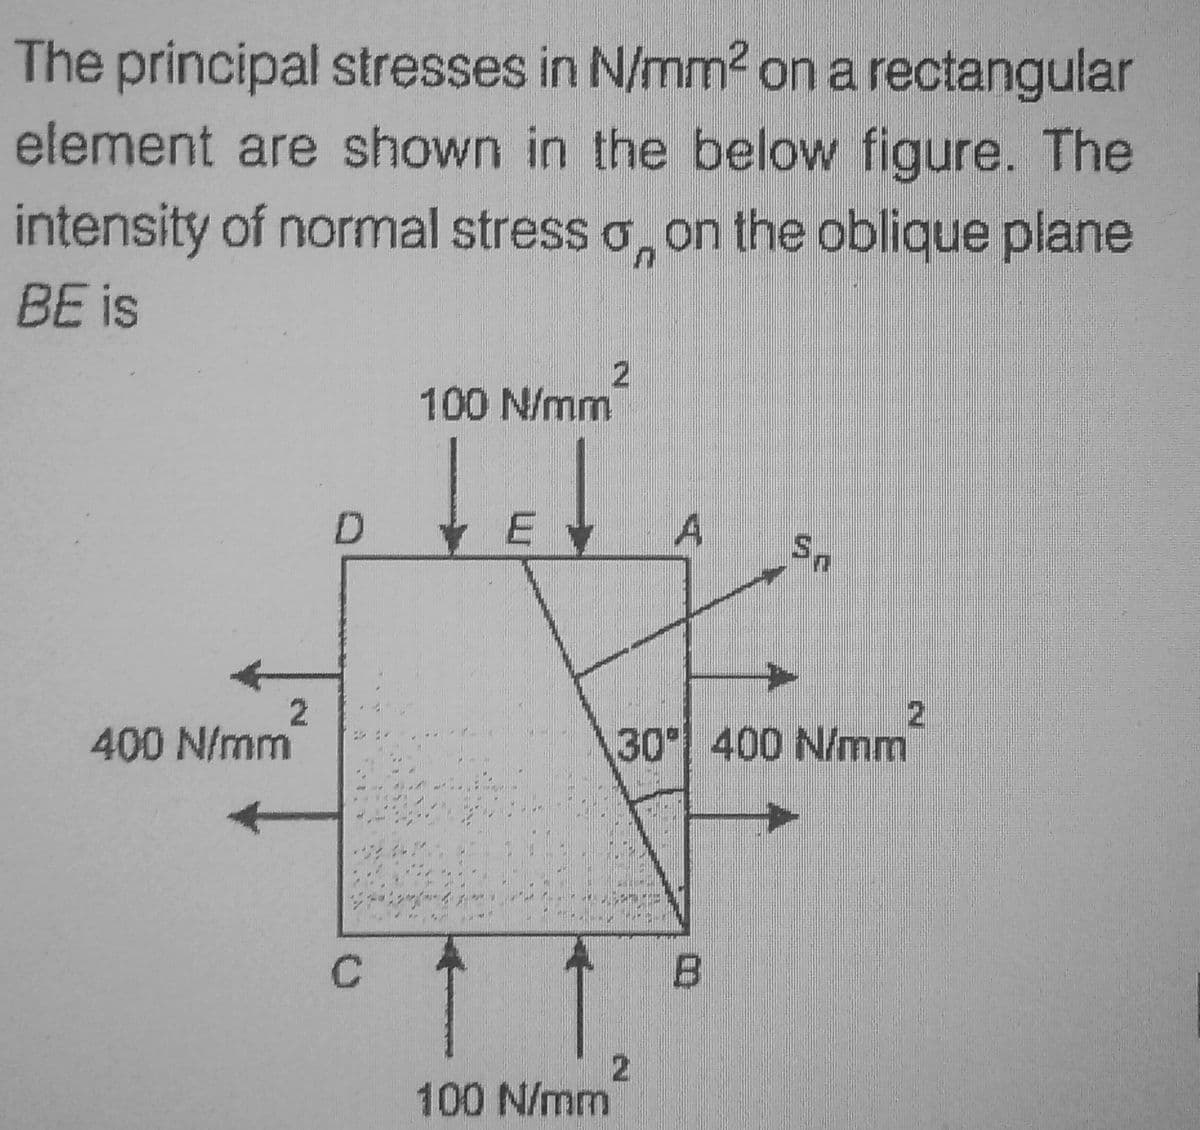 The principal stresses in N/mm² on a rectangular
element are shown in the below figure. The
intensity of normal stress o, on the oblique plane
BE is
400 N/mm
D
C
2
100 N/mm
E
100 N/mm
A
2
2
30 400 N/mm
Sn
B